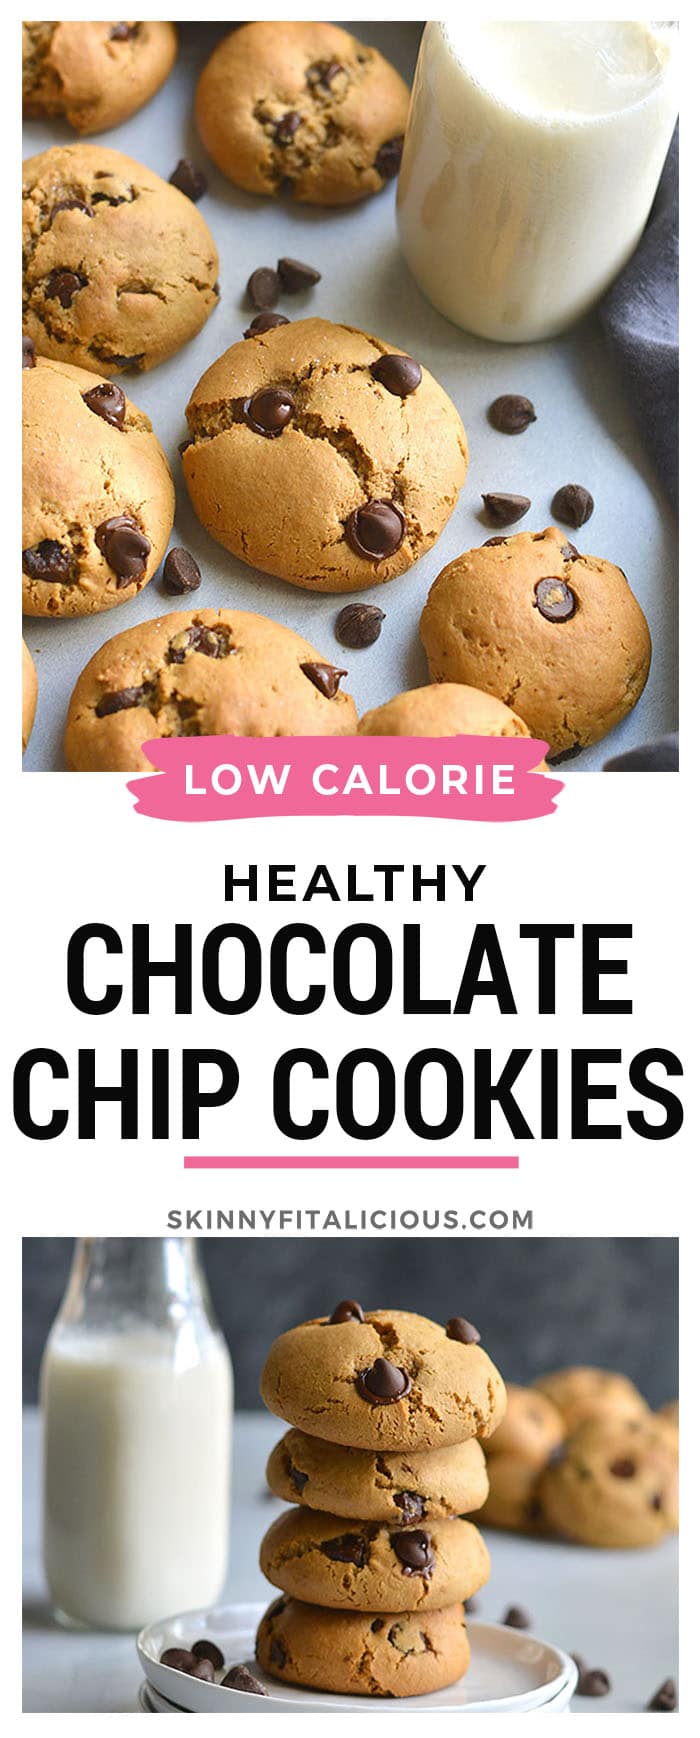 The best Almond Flour Chocolate Chip Cookies you'll ever eat! Made lighter and balanced in nutrition, this cookie recipe is easy to make and butter free. Soft, pillowy cookies! Paleo + Gluten Free 